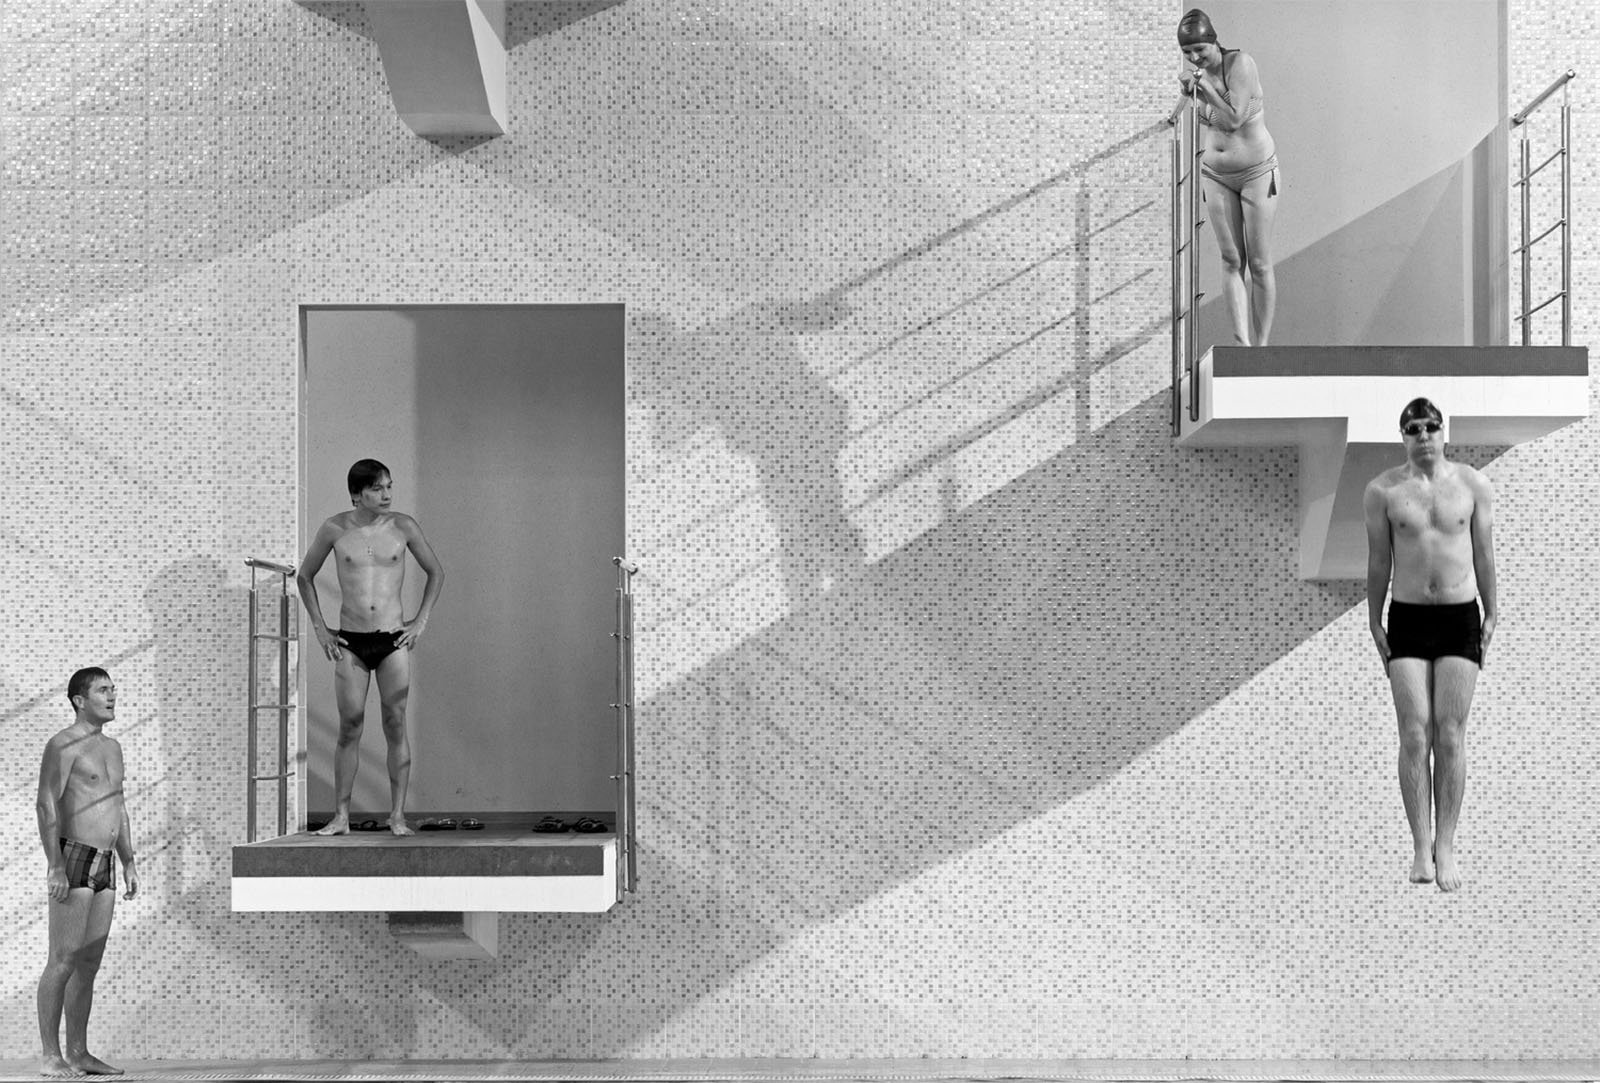 A black and white image shows four divers on a diving platform. One diver stands on the left, observing. Another stands on a lower platform slightly to the right. One more covers his face on the upper right platform, while a last diver jumps off from a height.